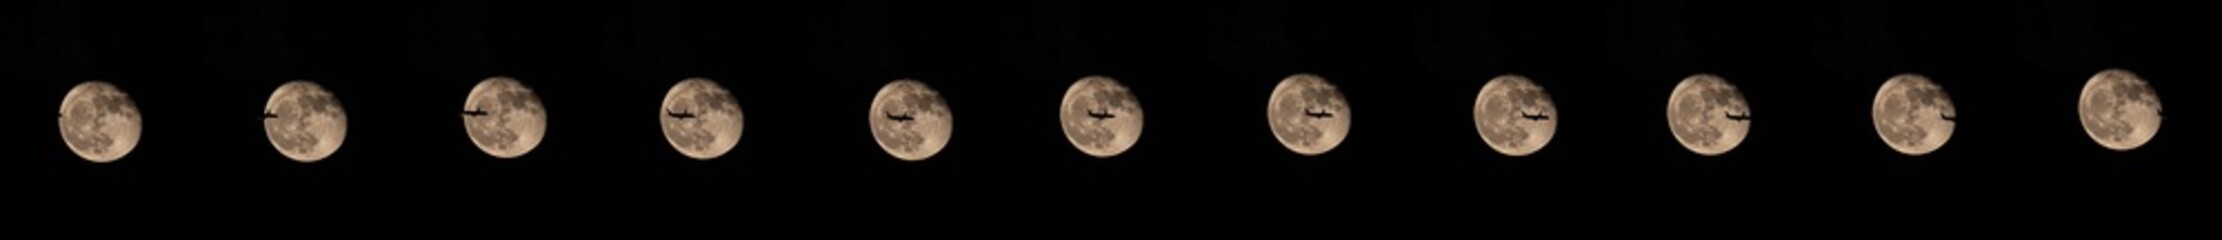 A commercial plane flyby the Moon - 14 shots merged